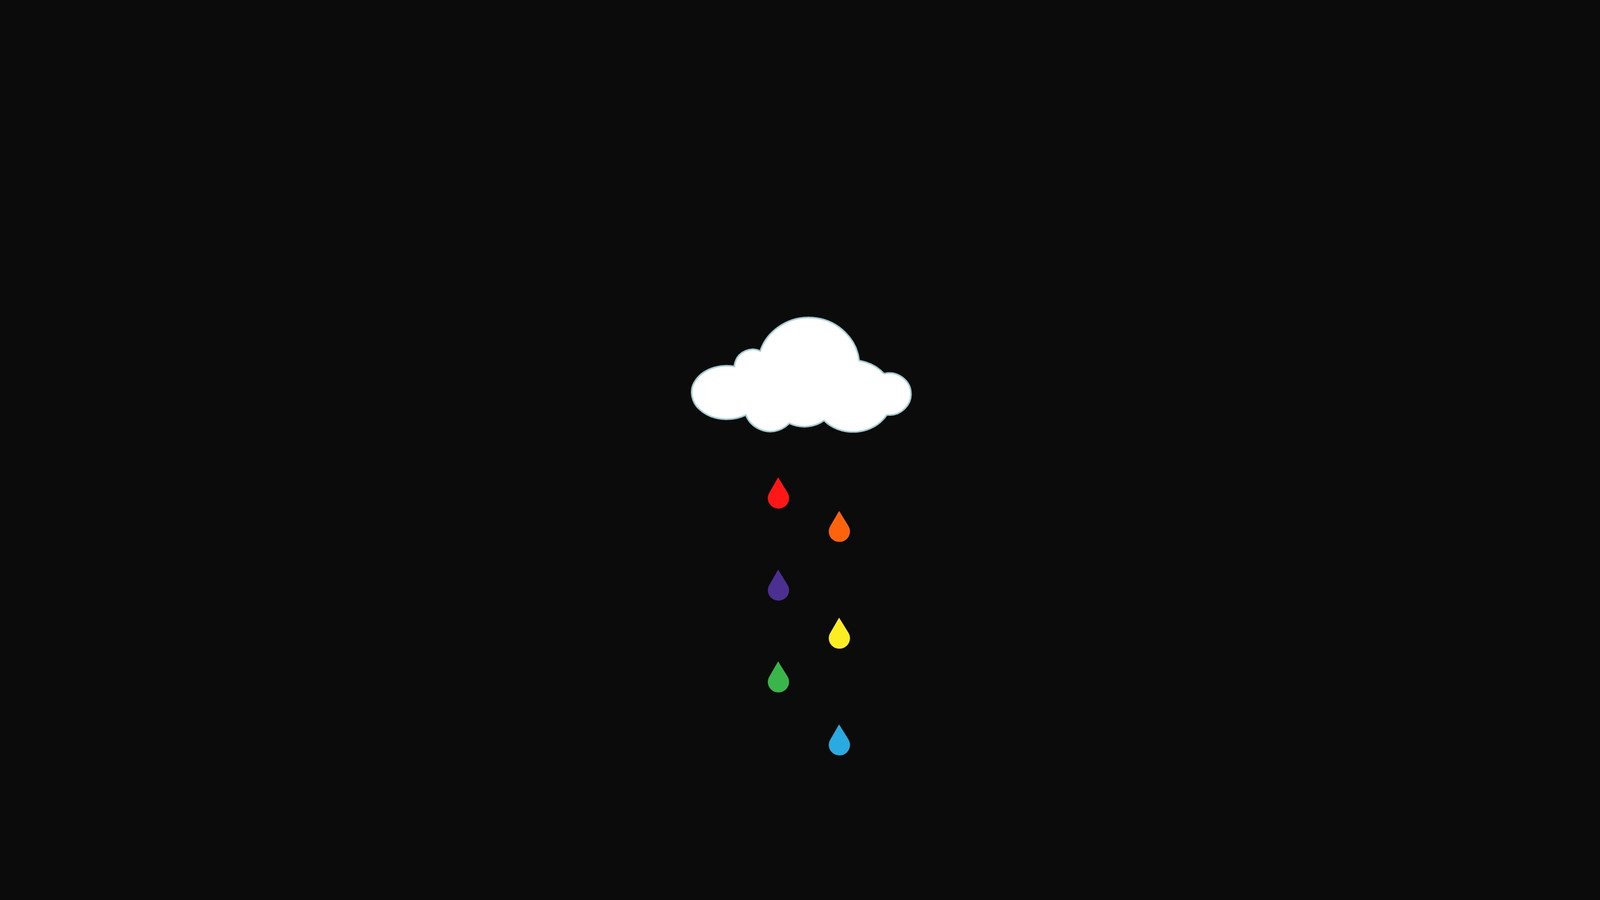 A white cloud on a black background with rainbow drops falling from it - LGBT